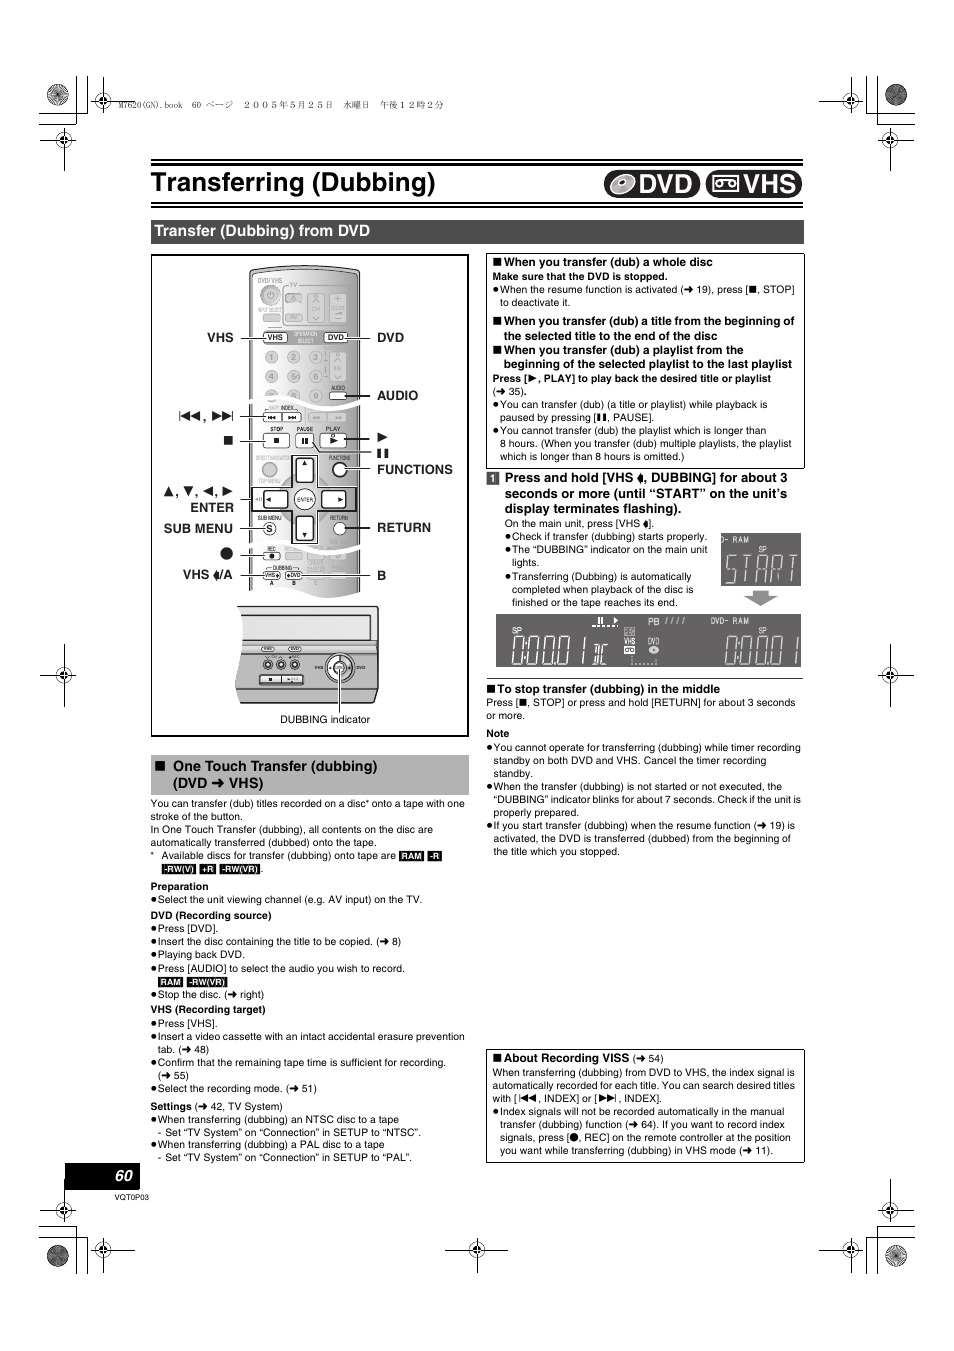 Transfer (dubbing) from dvd, One touch transfer (dubbing) (dvd, L 60) | Transferring (dubbing), Vhs dvd, One touch transfer (dubbing) (dvd l vhs) | Panasonic DIGA DMR-ES30V User Manual | Page 60 / 76